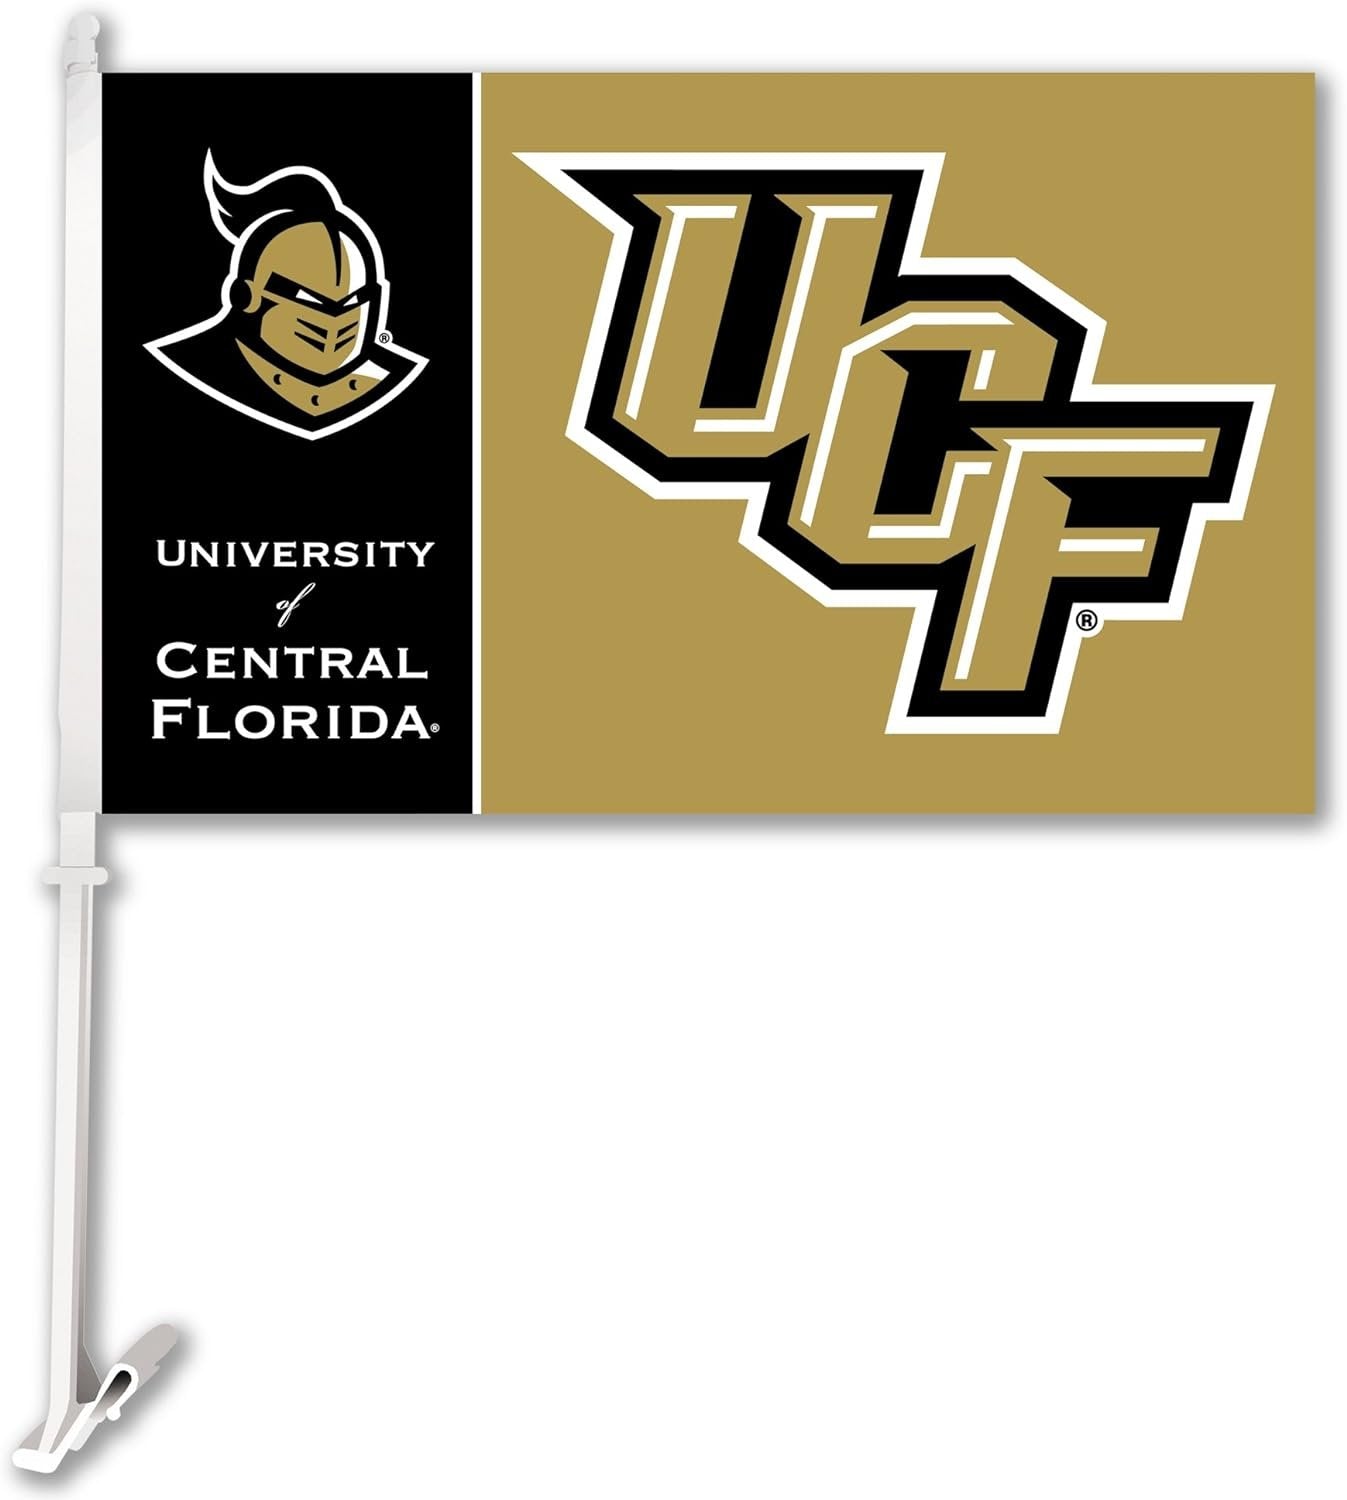 University of Central Florida UCF Knights Premium Double Sided Car Flag Banner with included Plastic Display Pole